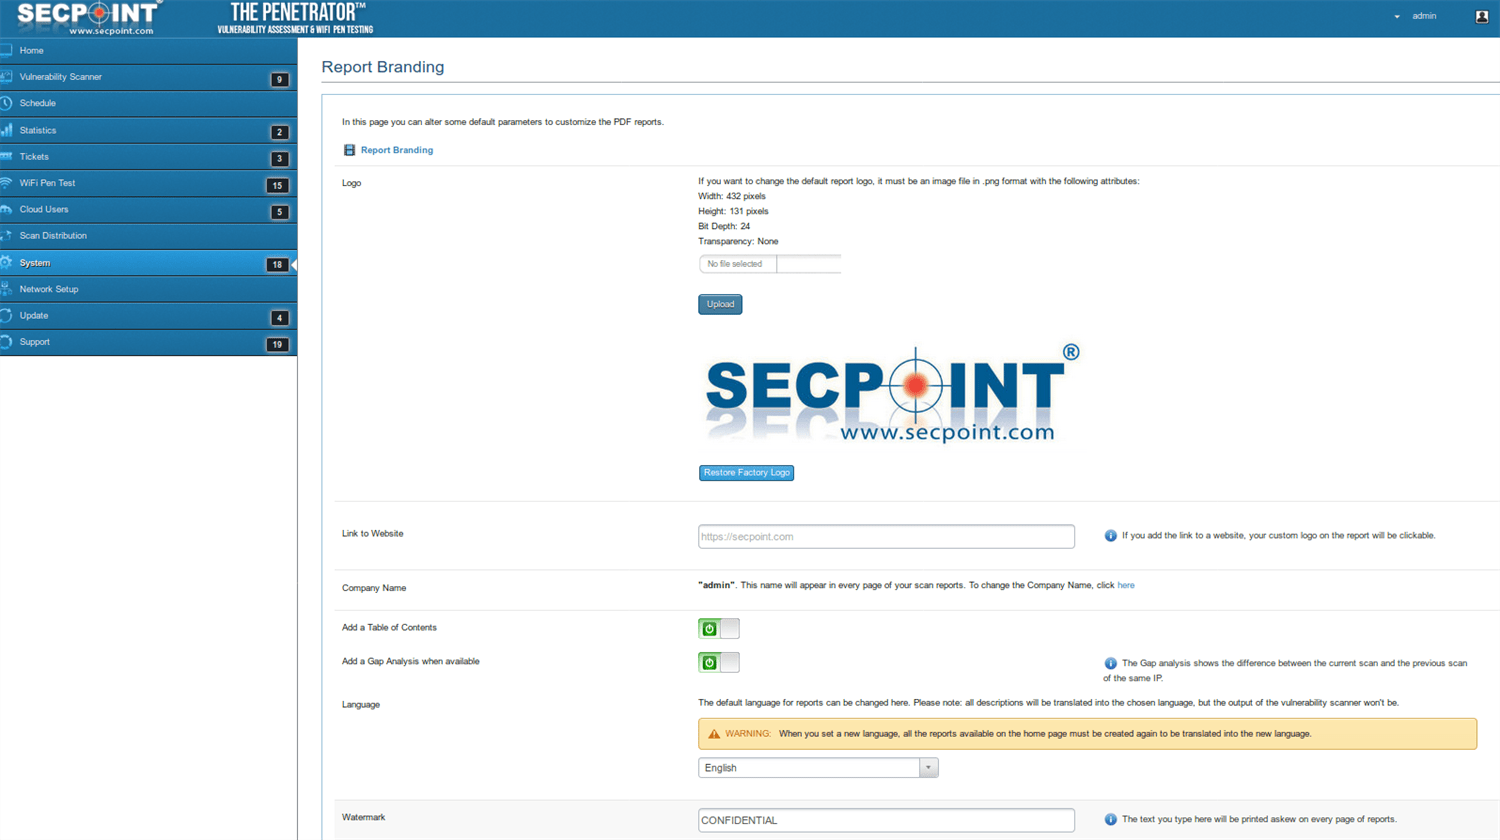 SecPoint Penetrator S9 - 32 IP Concurrent Scan License VULNERABILITY (1 Year License) - SecPoint